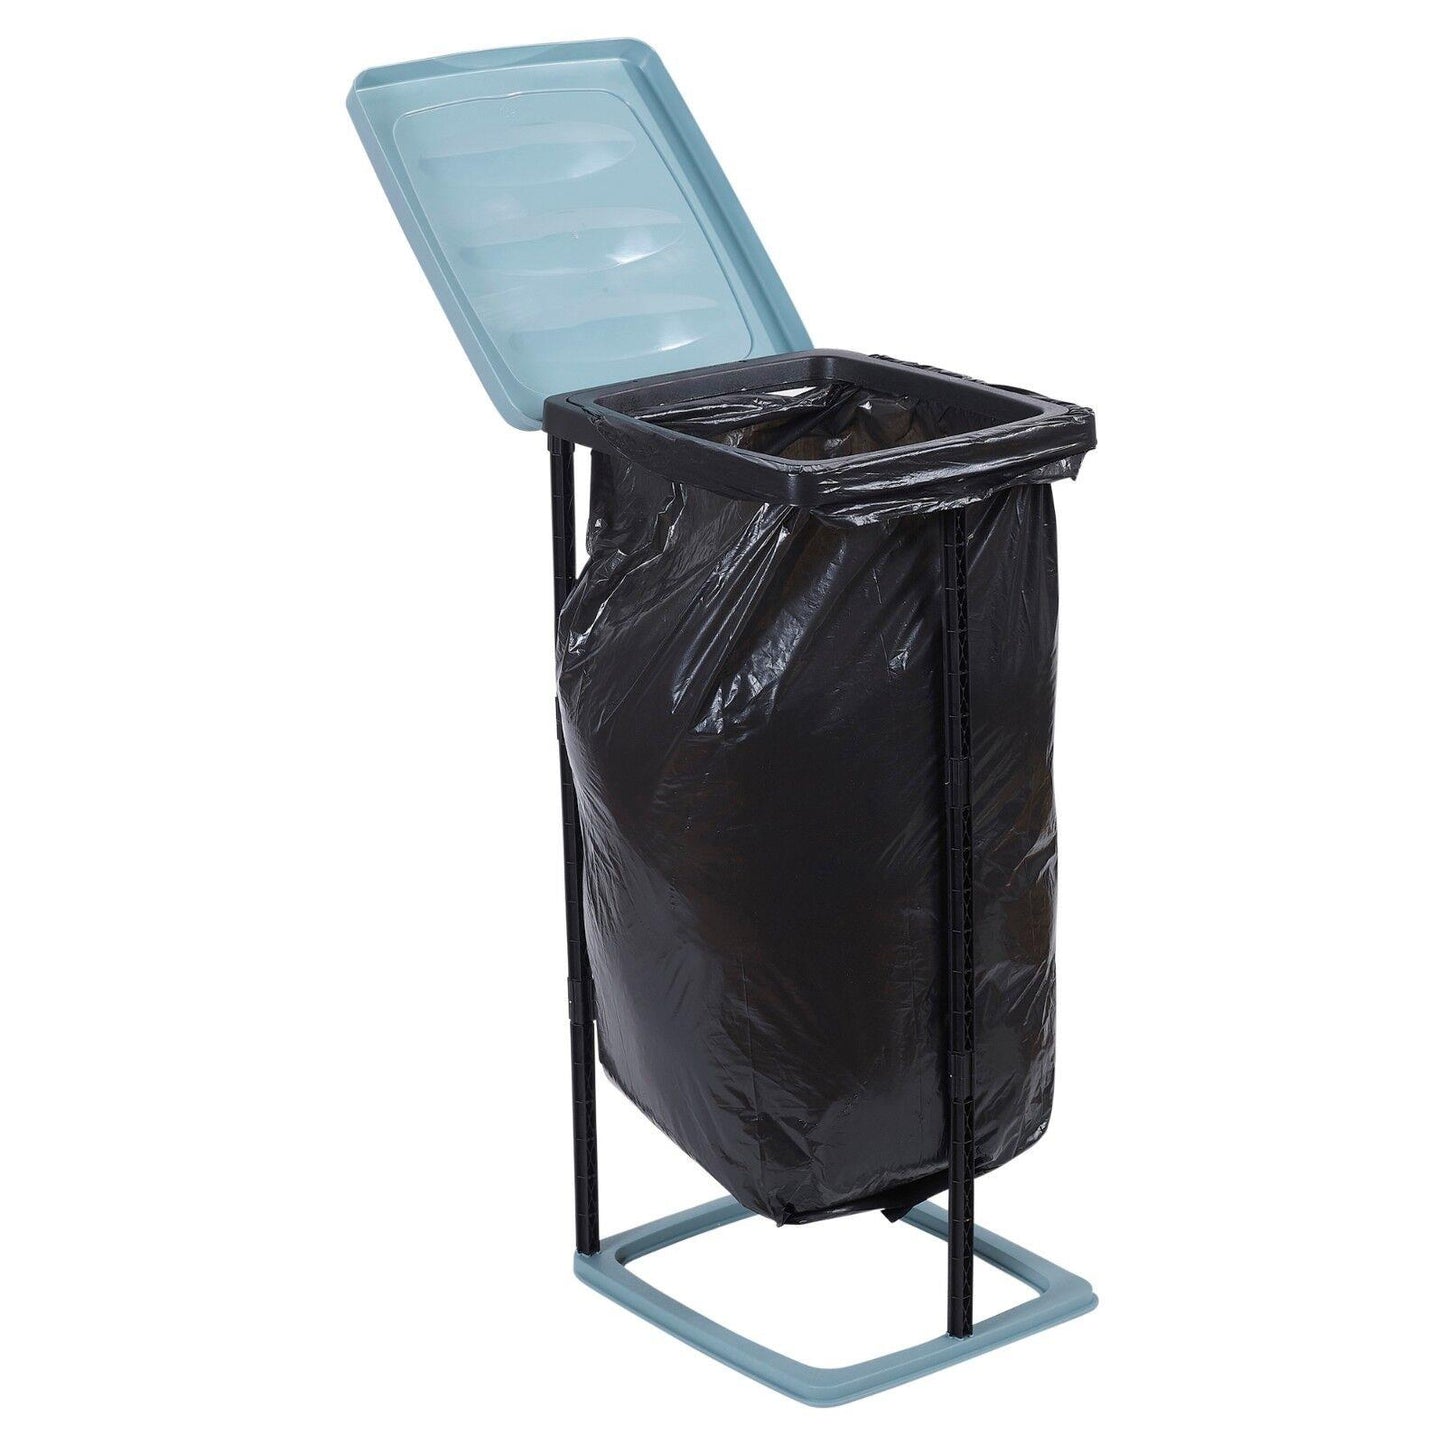 Rubbish Bag Stand by Geezy - UKBuyZone